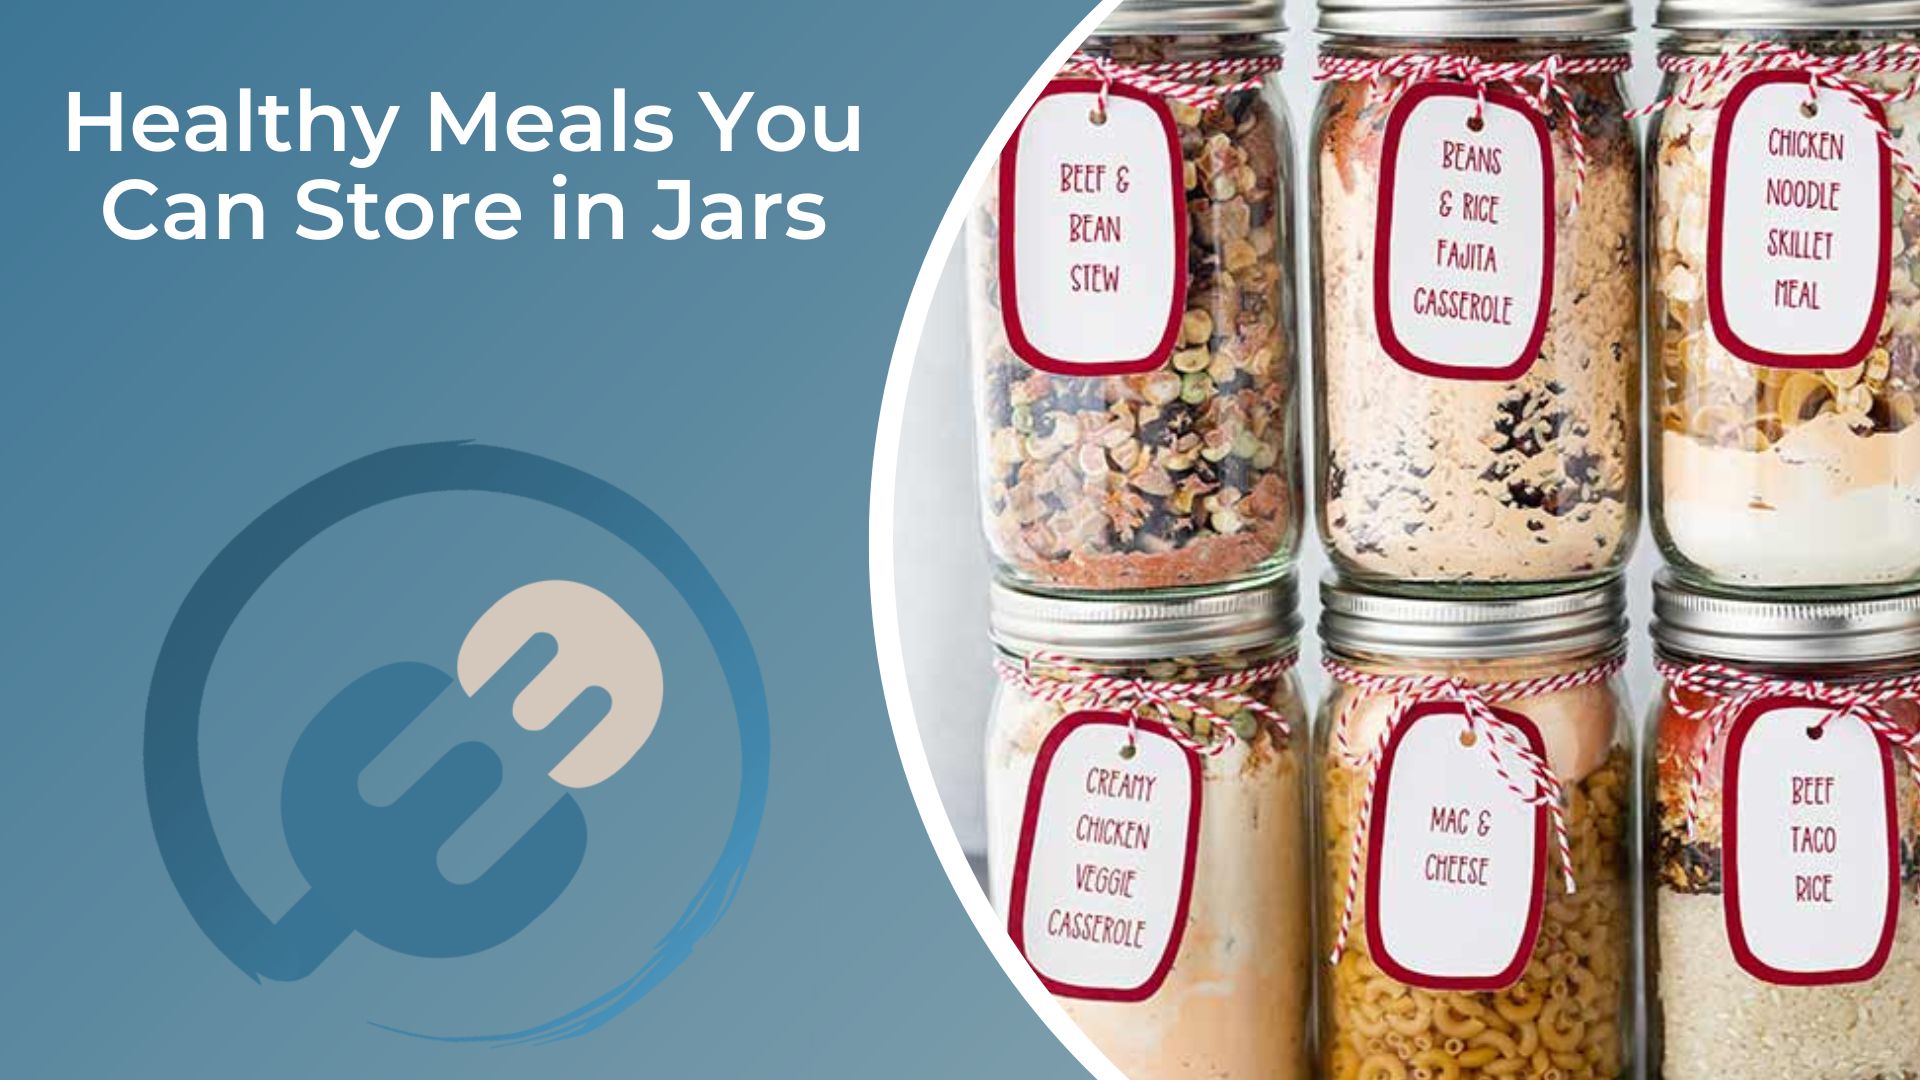 Healthy Meals You Can Store in Jars